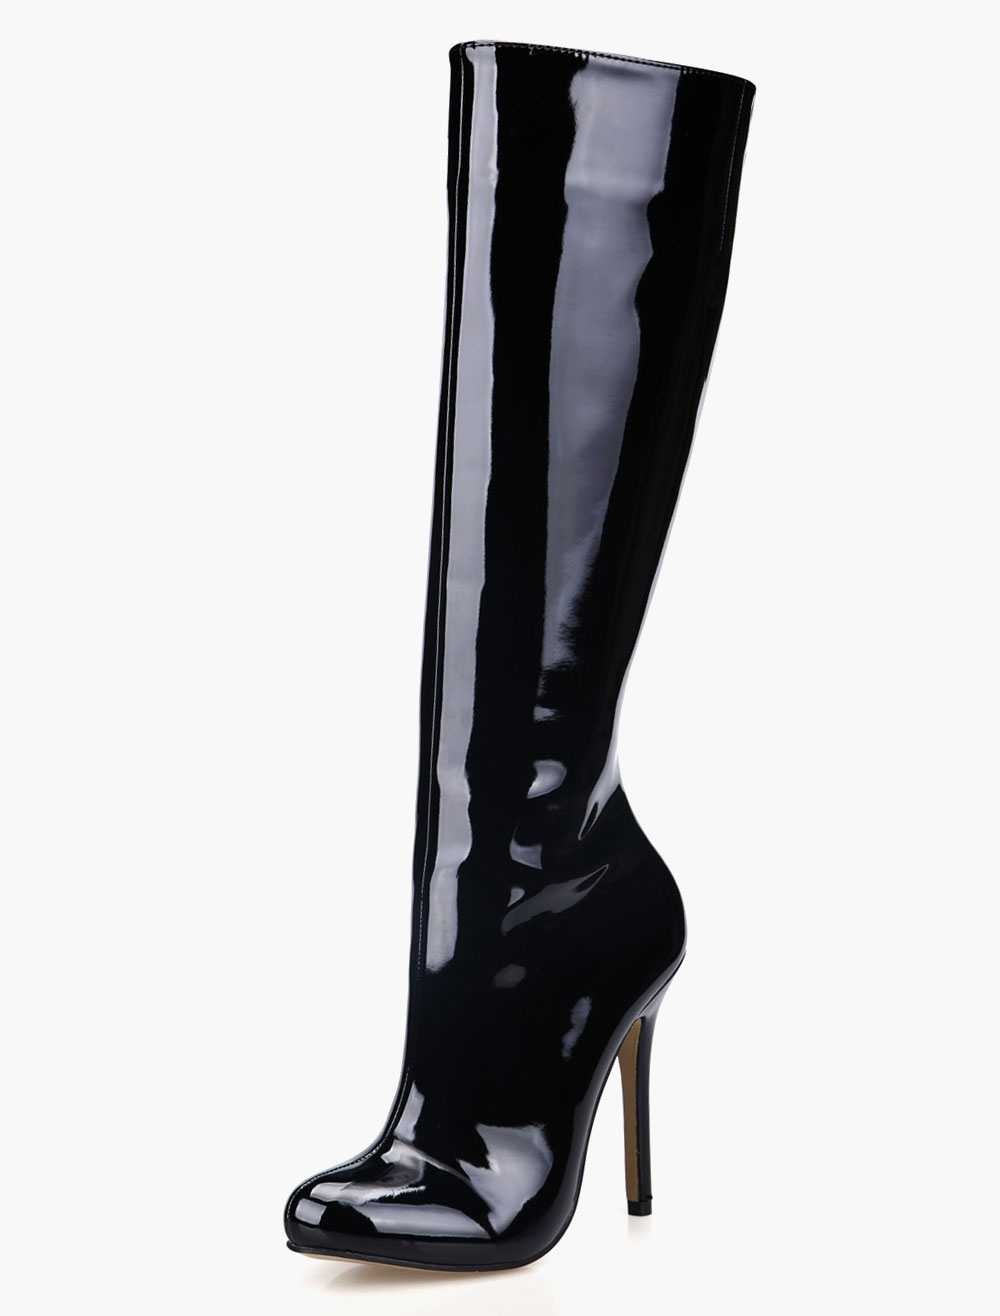 knee high leather winter boots